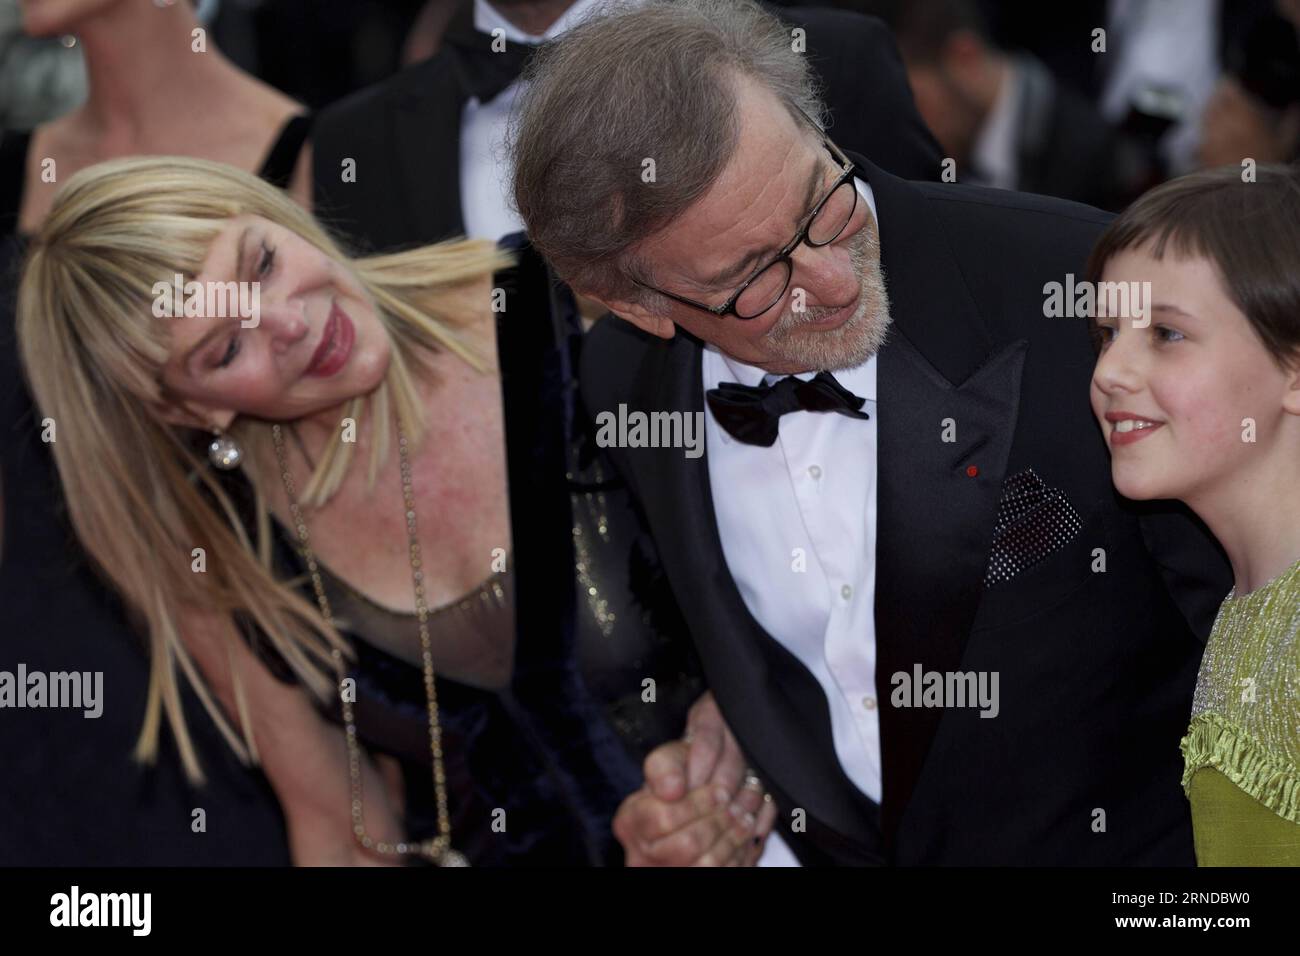 (160515) -- CANNES, May 14, 2016 -- Director Steven Spielberg (C), his wife Kate Capshaw (L) and cast member Ruby Barnhill (R) pose on the red carpet as they arrive for the screening of the film The BFG at the 69th Cannes Film Festival in Cannes, France, May 14, 2016.) FRANCE-CANNES-FILM FESTIVAL-THE BFG-RED CARPET JinxYu PUBLICATIONxNOTxINxCHN   160515 Cannes May 14 2016 Director Steven Spielberg C His wife Kate Capshaw l and Cast member Ruby Barnhill r Pose ON The Red Carpet As They Arrive for The Screening of The Film The BfG AT The 69th Cannes Film Festival in Cannes France May 14 2016 Fra Stock Photo